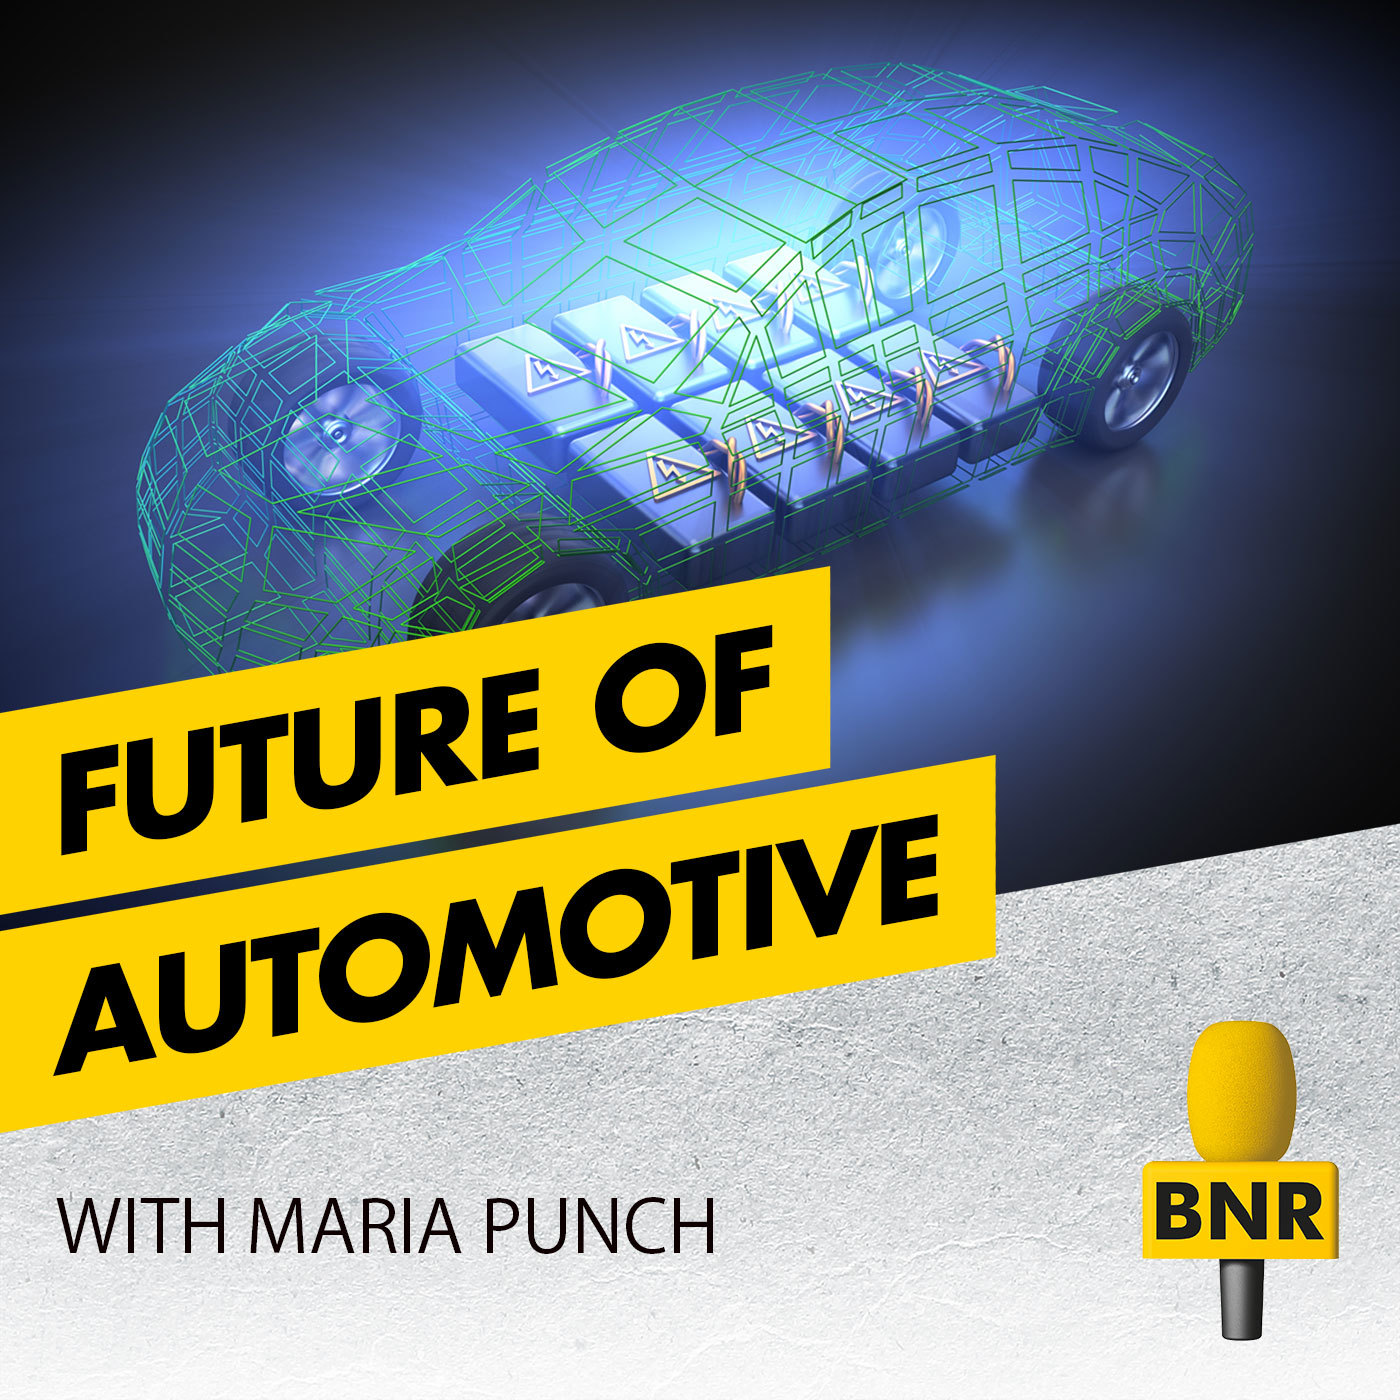 Future of Automotive is a new podcast of BNR Nieuwsradio, focussing on the way our means of transportation will change the coming decades